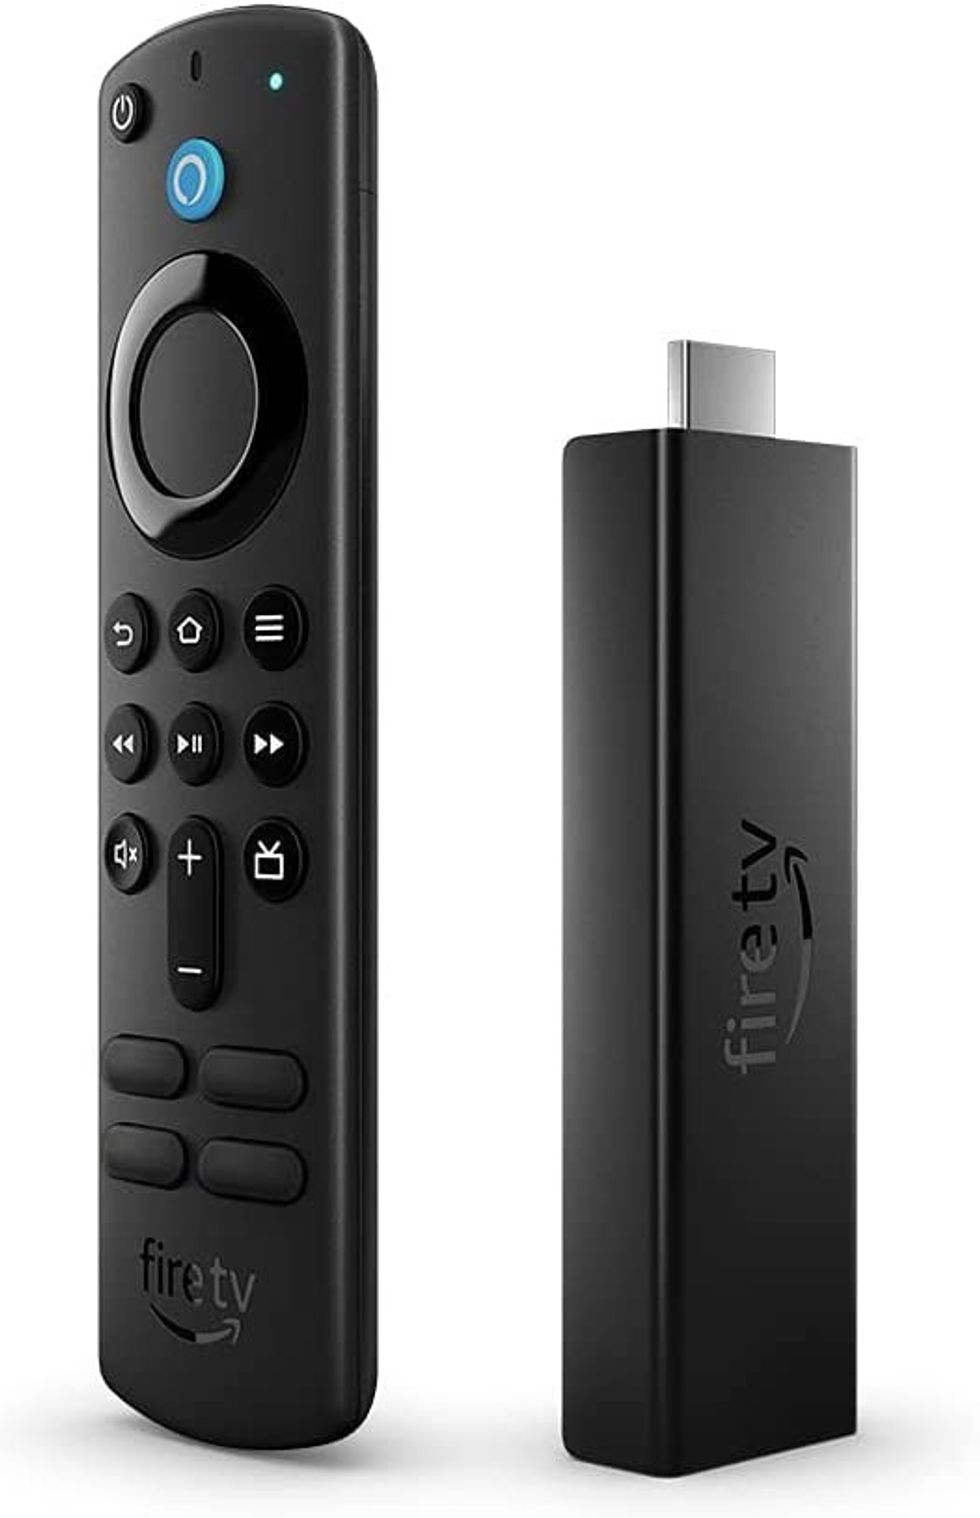 Introducing Fire TV Stick 4K Max streaming device